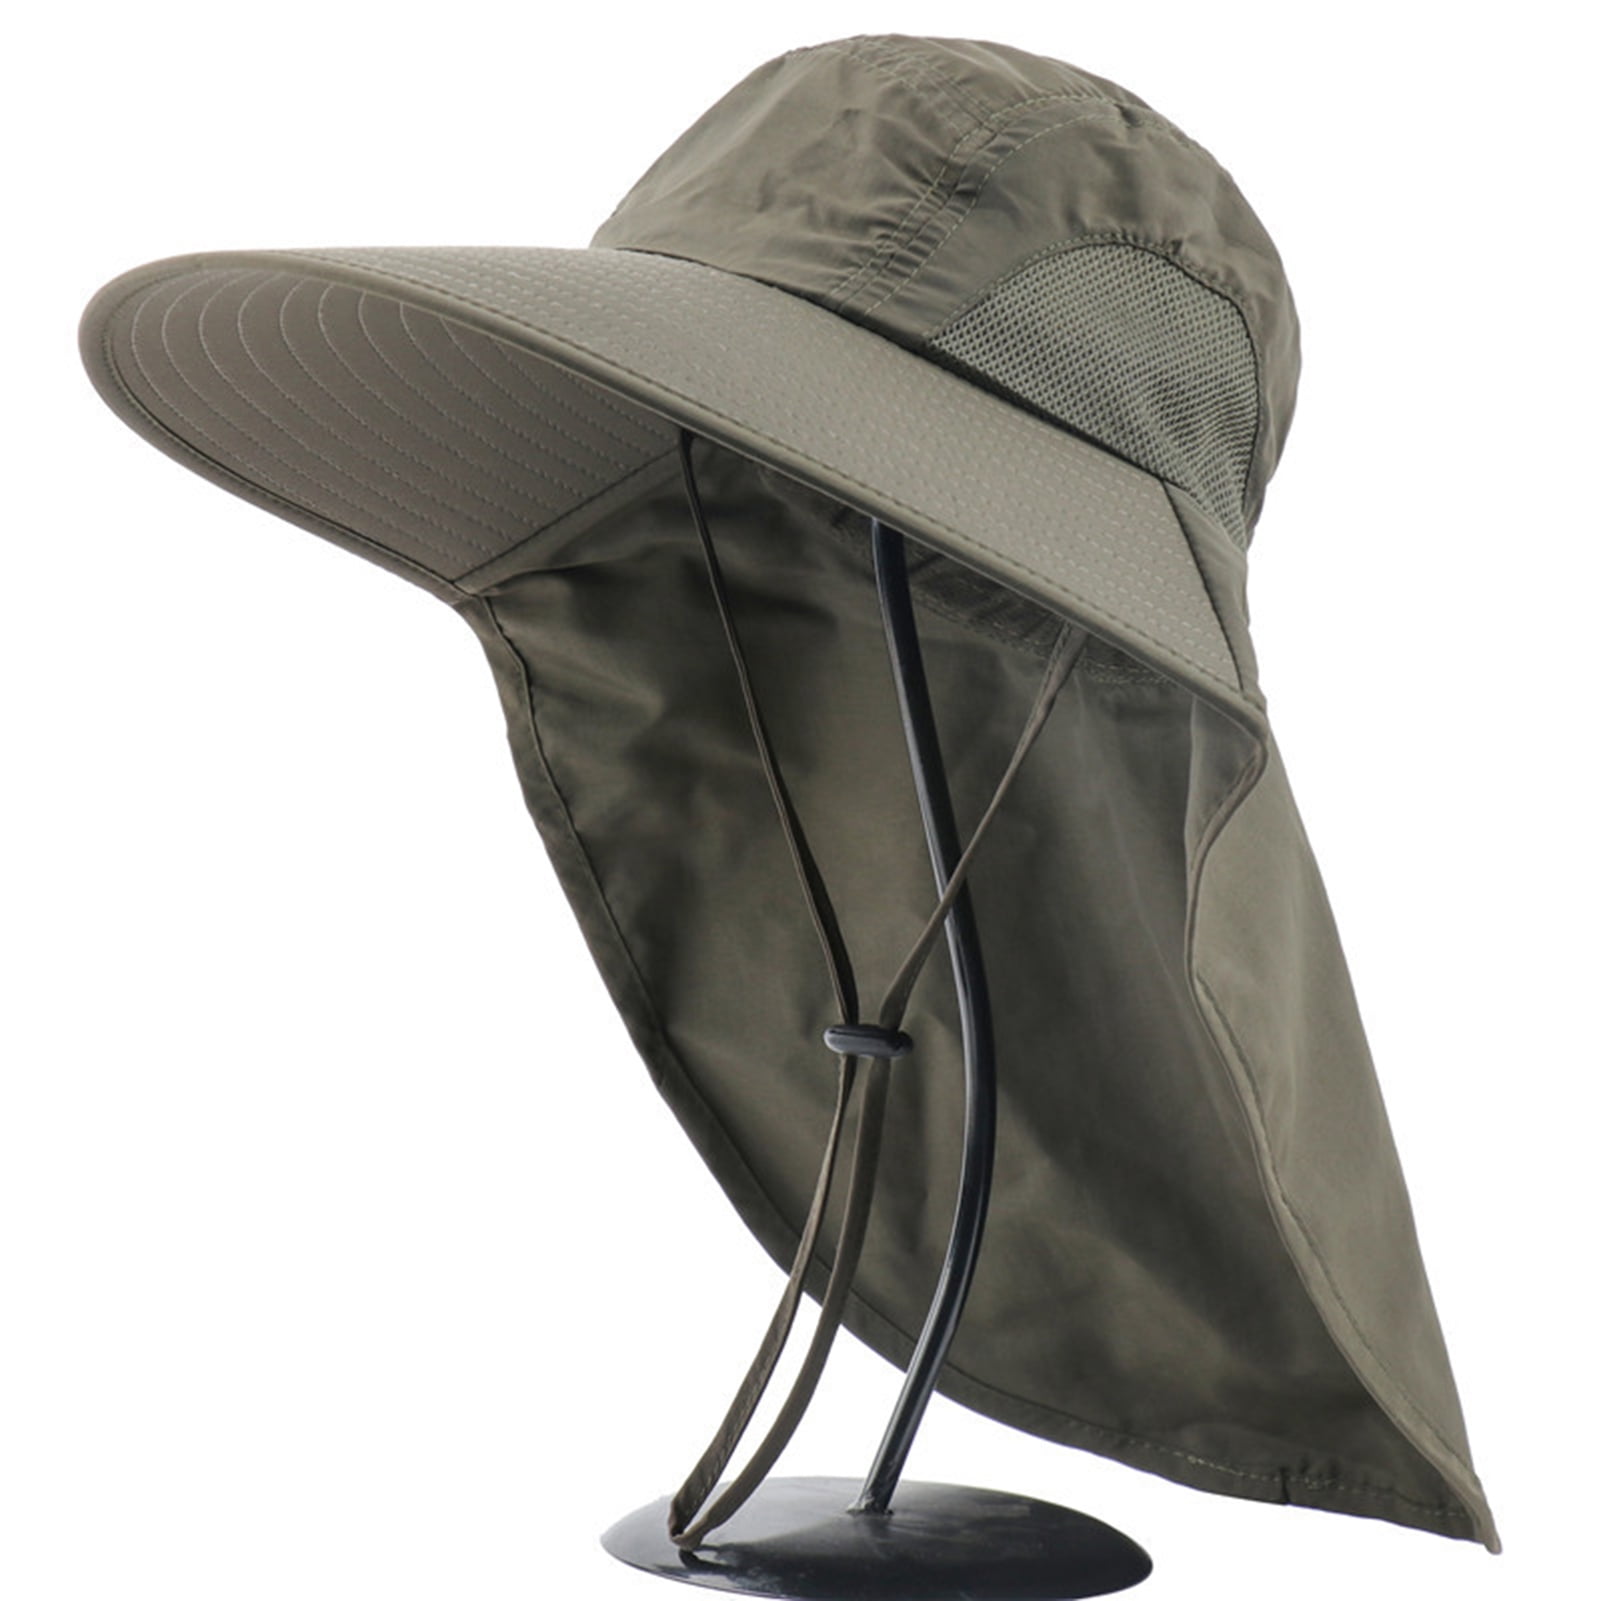 Breathable 50+ with with Sun Men Protection Hat Fishing Hat Waterproof Neck Outdoor UPF Wide Flap Safari Brim Cap Cheers.US for